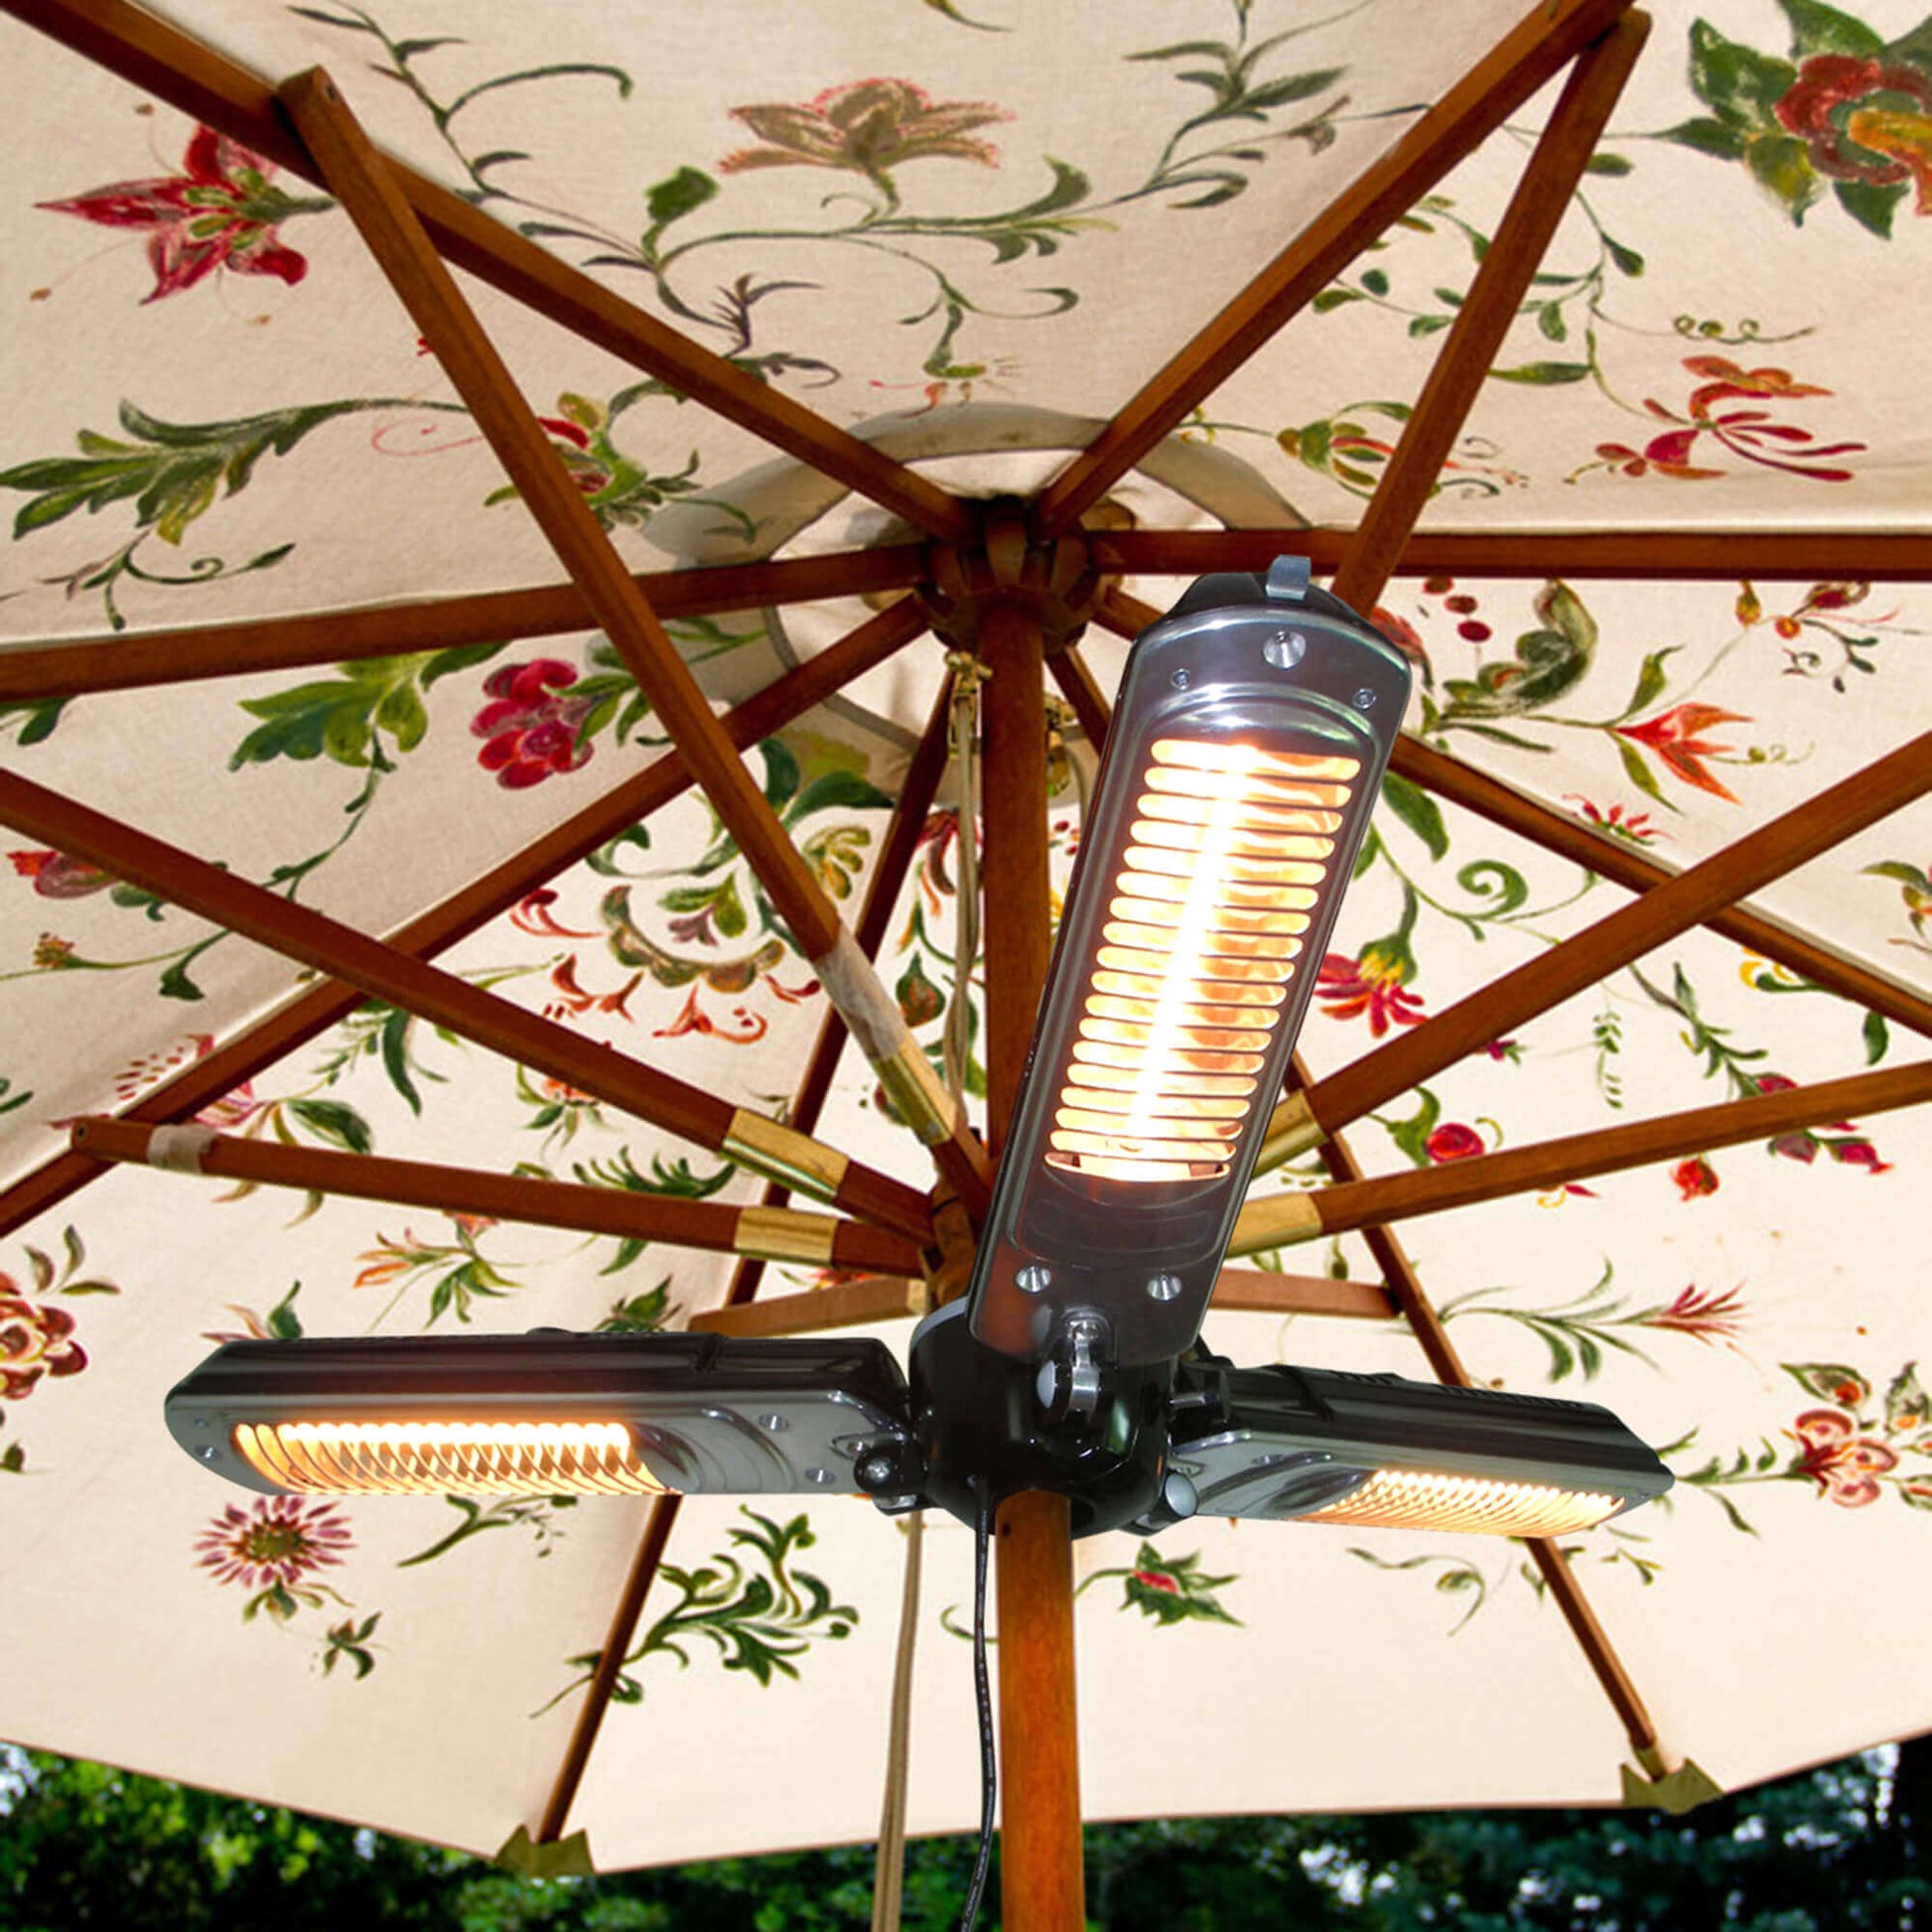 Electric Parasol Patio Umbrella Heater/ Folding Outdoor Efficient Electric Infrared Space Heater(US logistics delay, expected to be shipped on October 5th.)